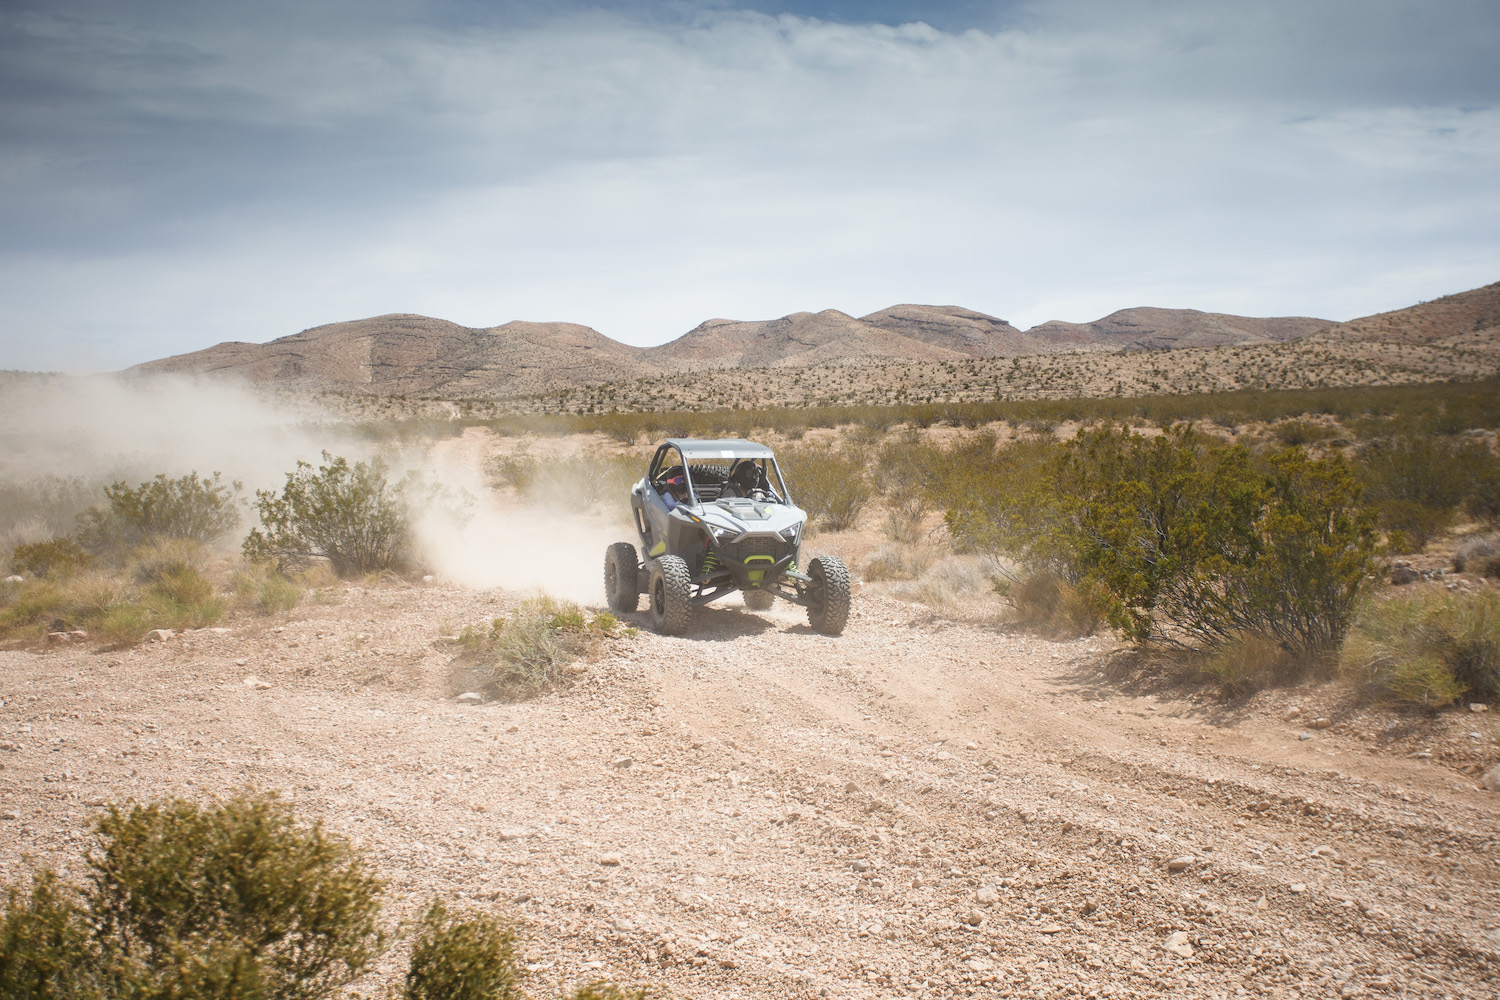 Polaris RZR Turbo R sliding on a dirt path in the desert with mountains and dust in the background.